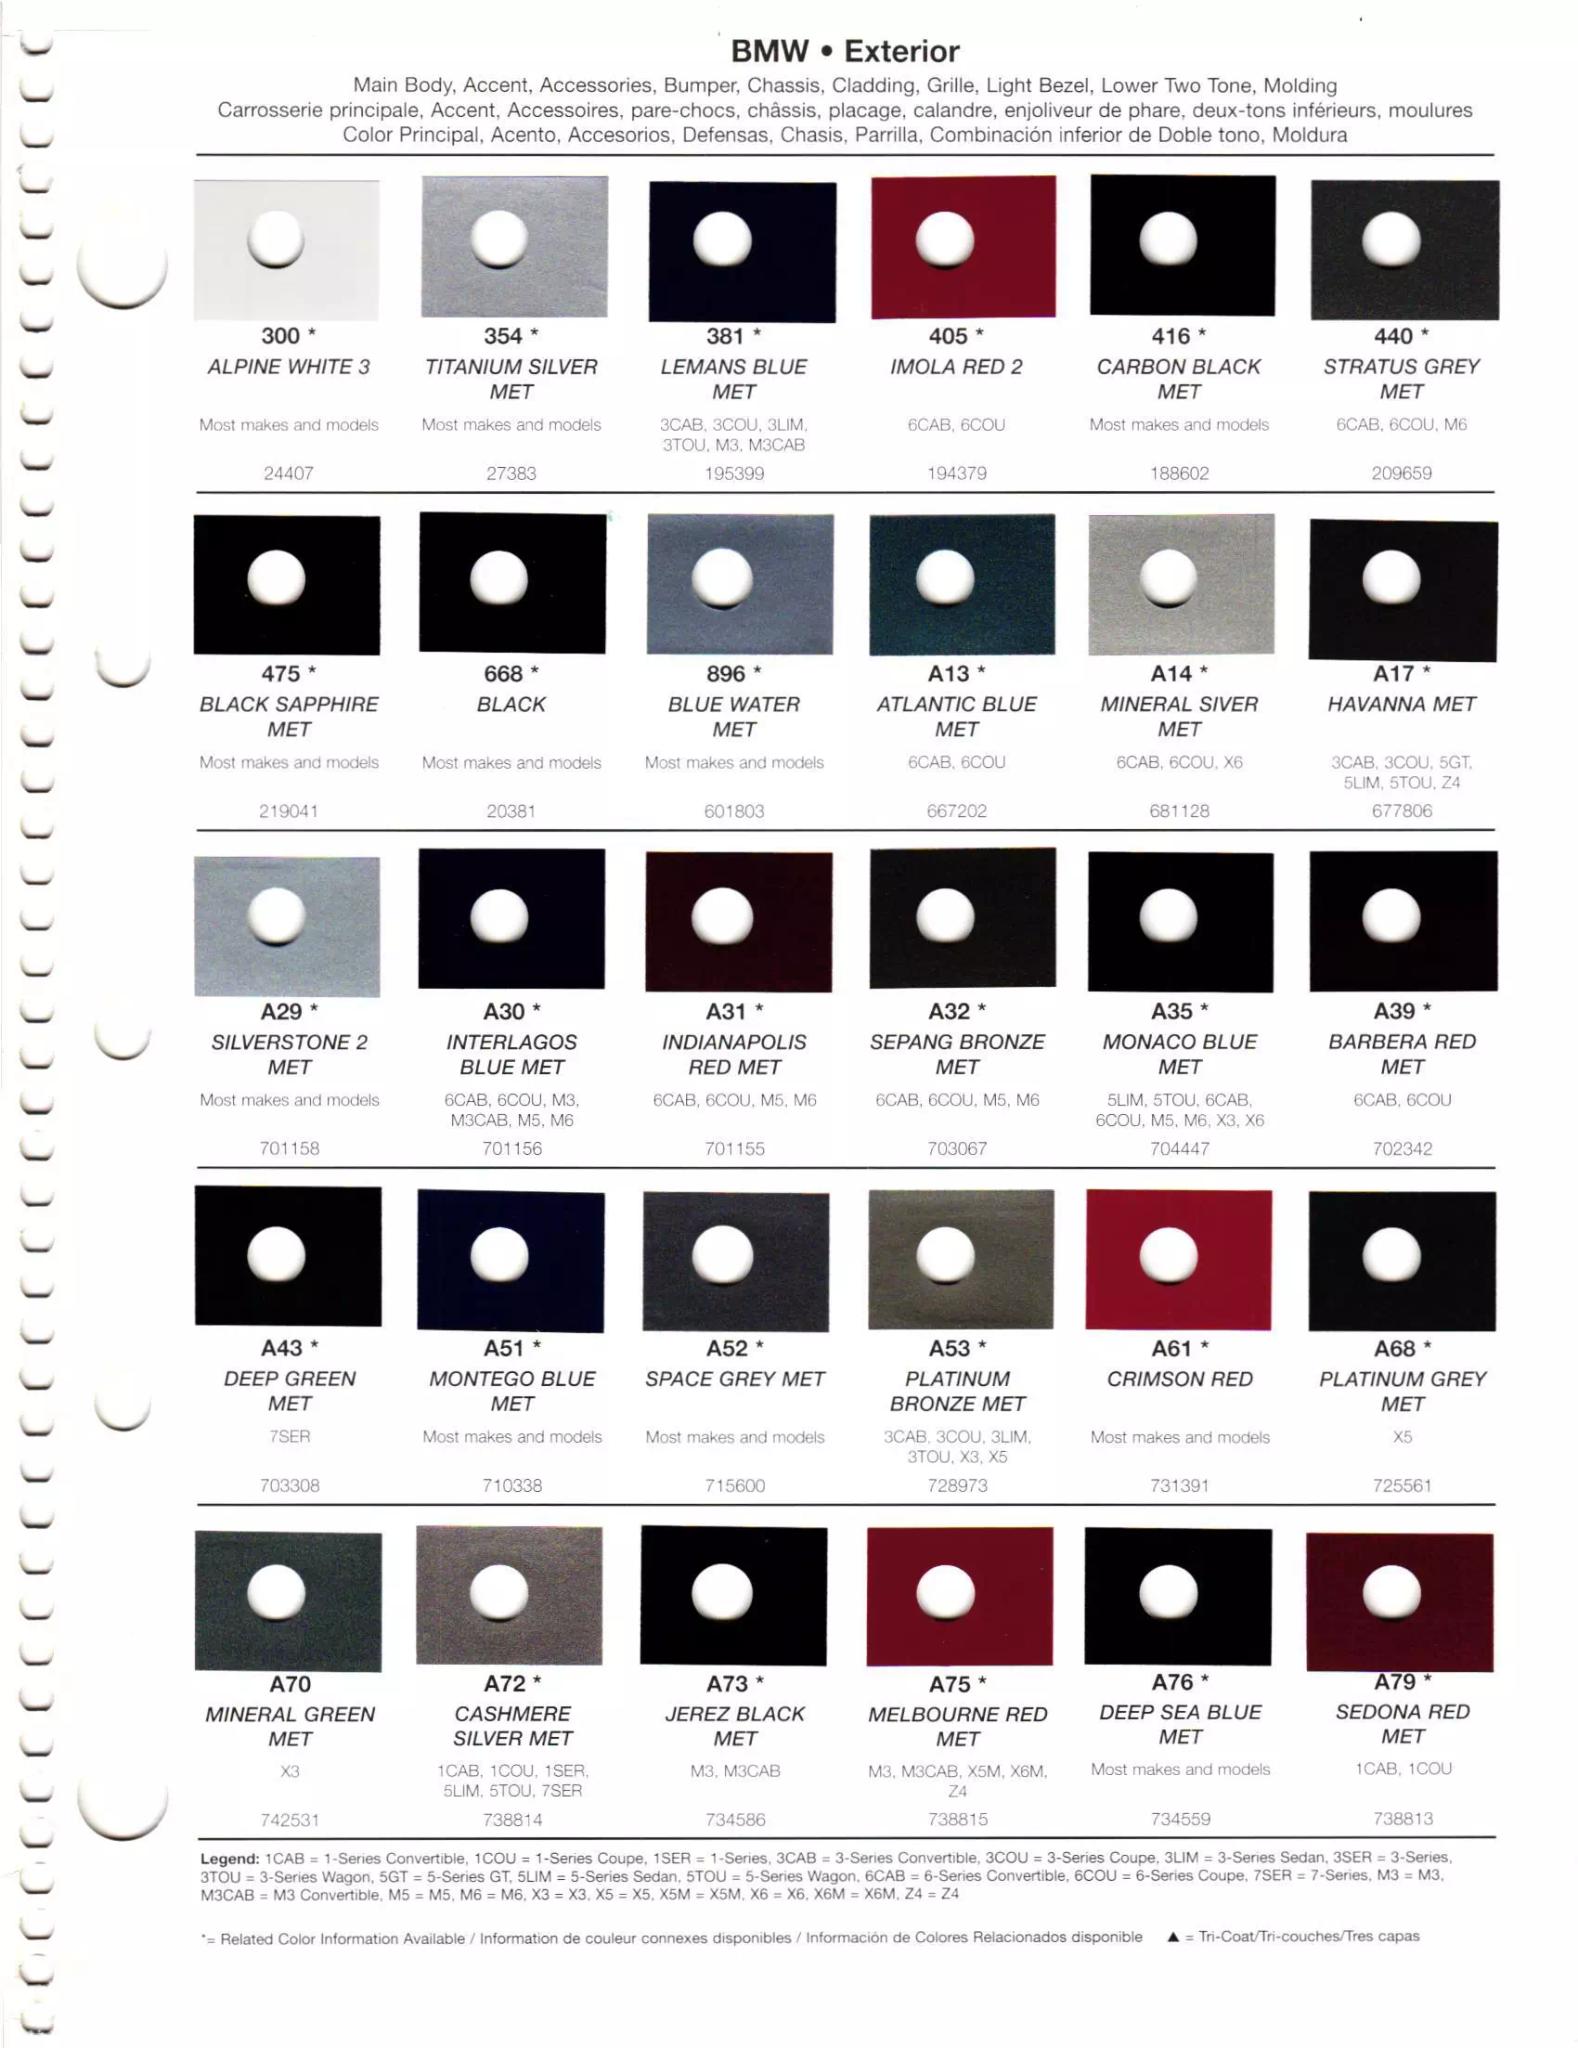 Paint Chips for Exterior, Interior, and Wheel Colors For BMW Colors in 2011